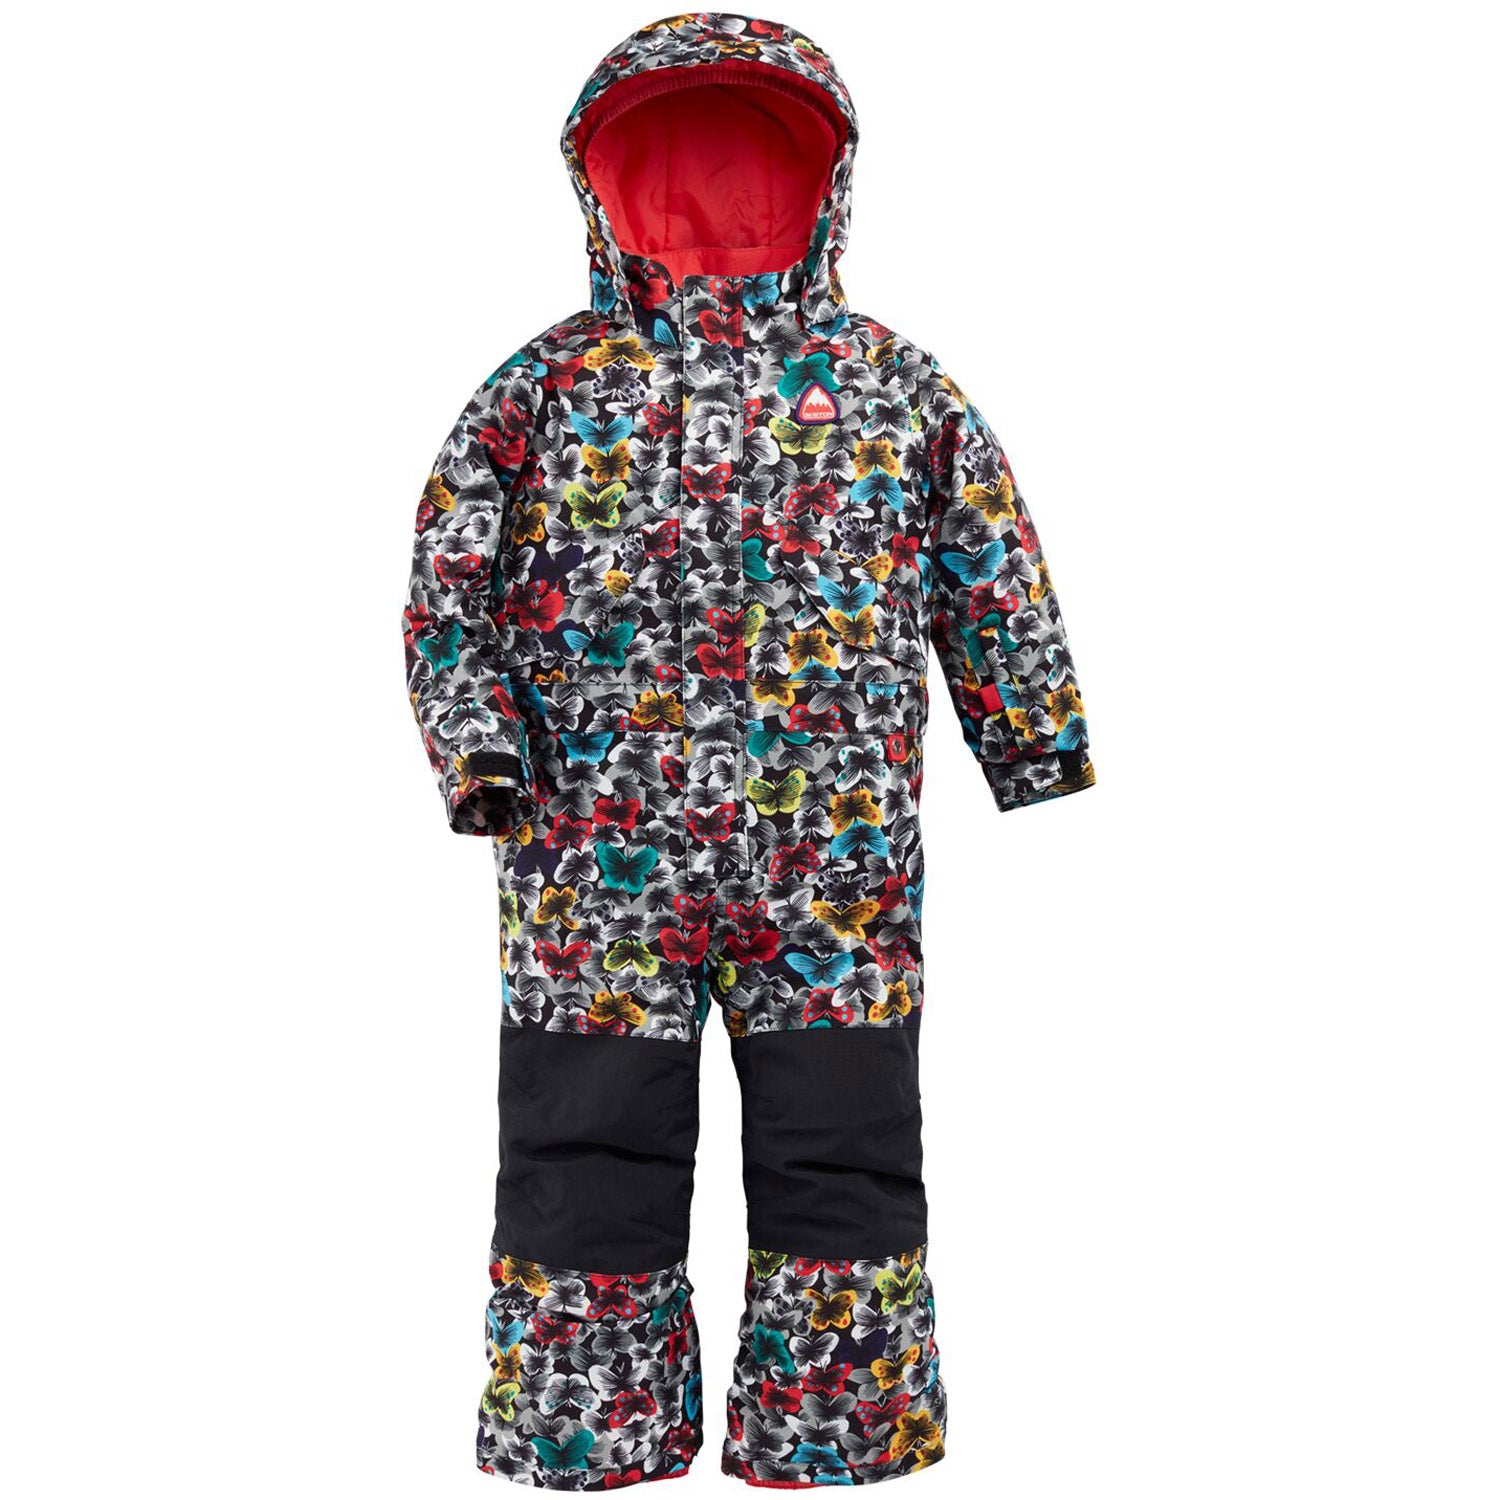 Burton Toddlers One Piece Snow Suit 2021 Hibiscus Pink / Limeade